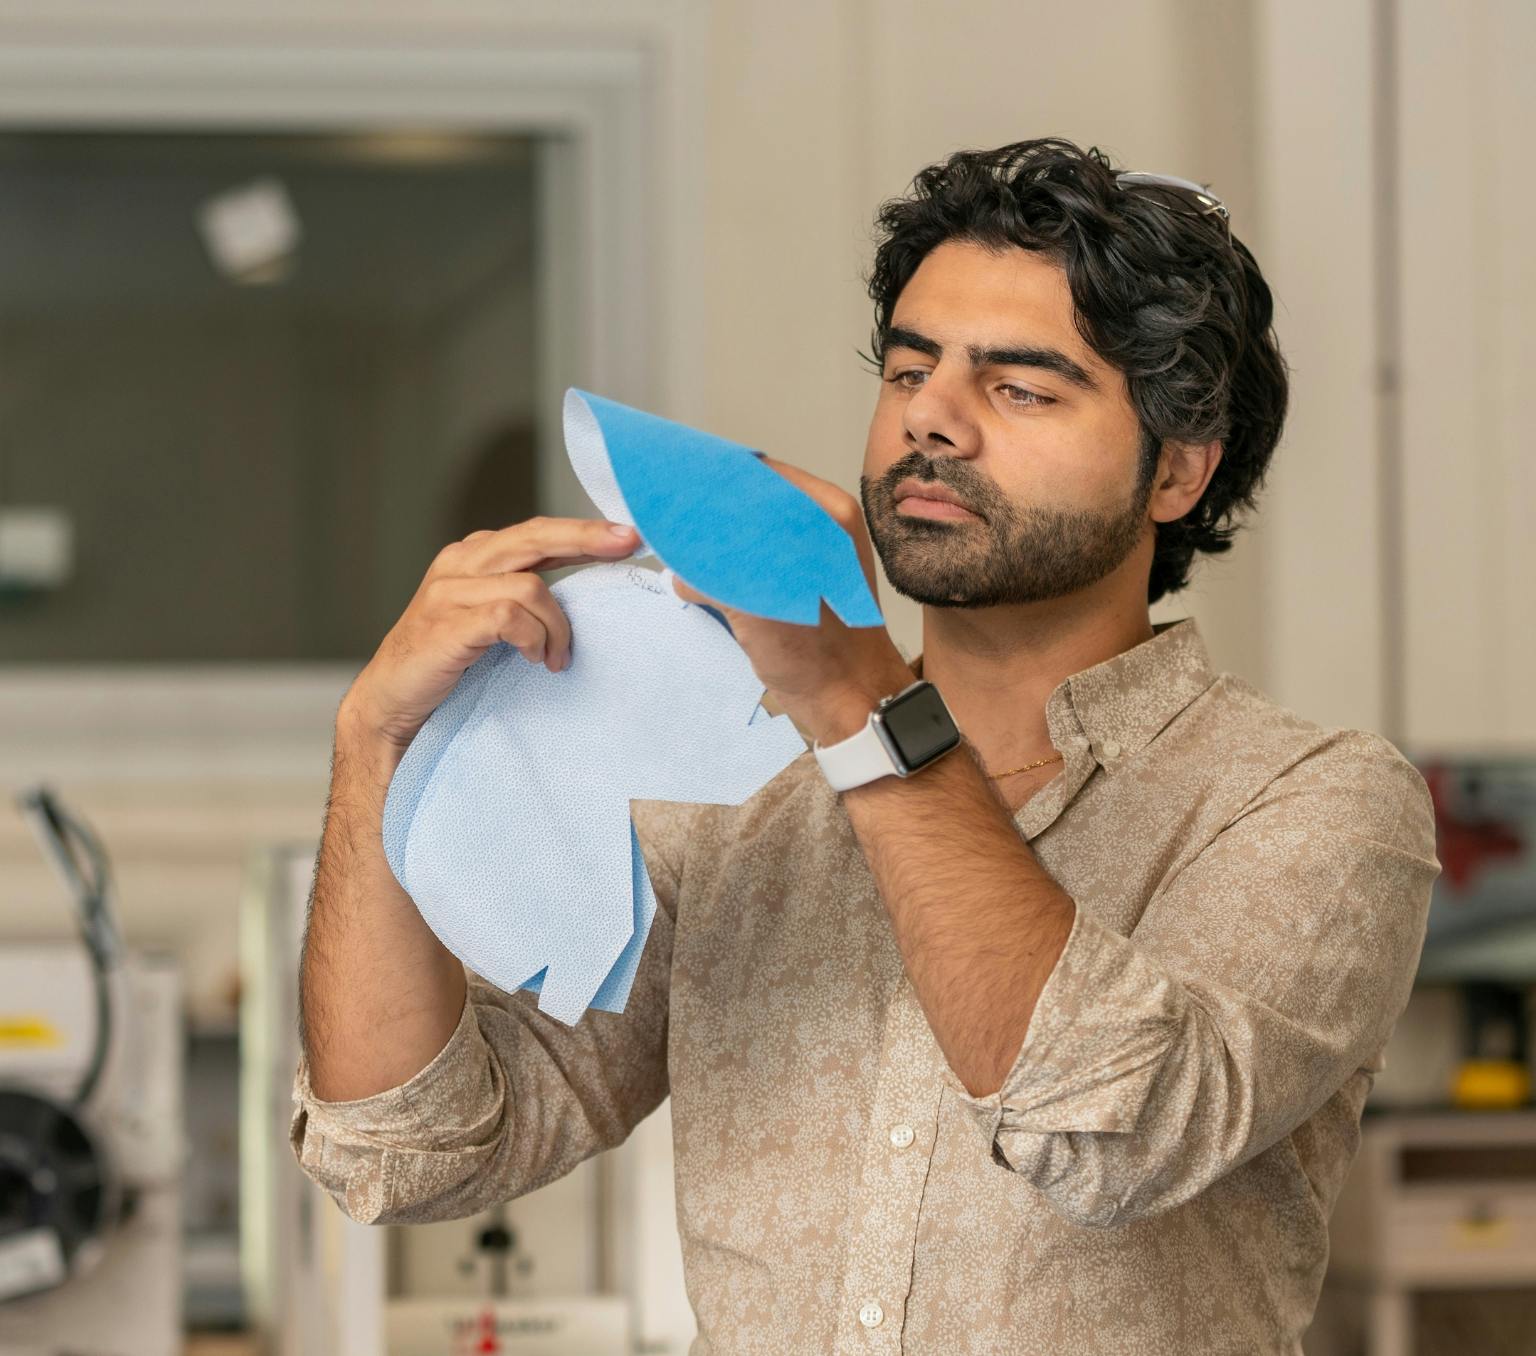 a man is holding up and looking at piece of blue fabric used to make face masks